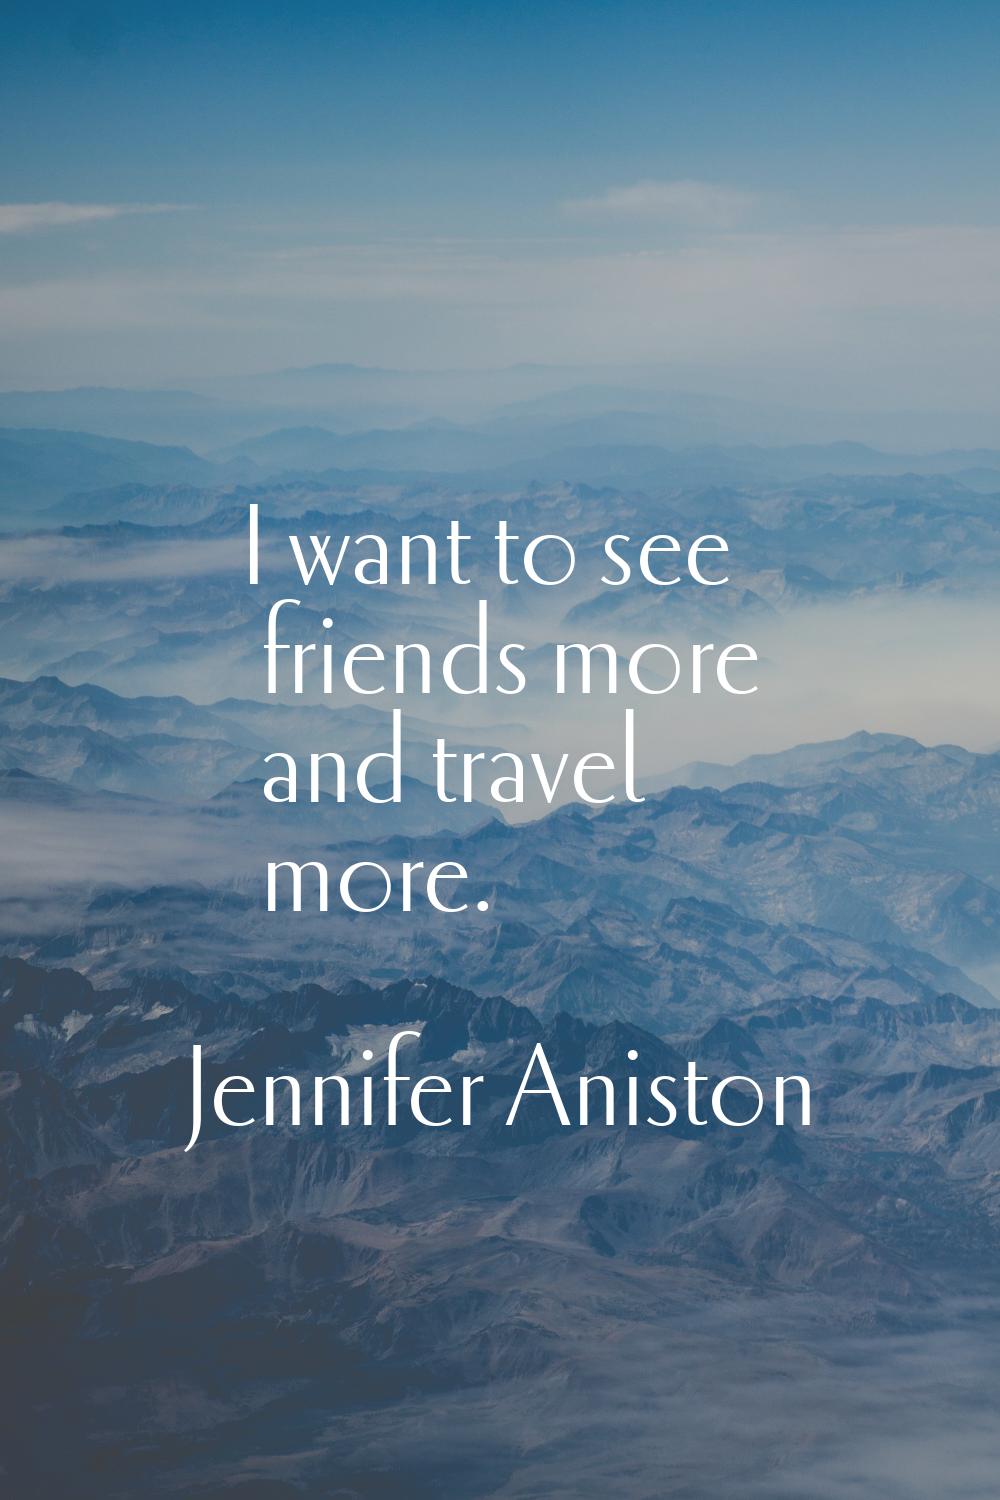 I want to see friends more and travel more.